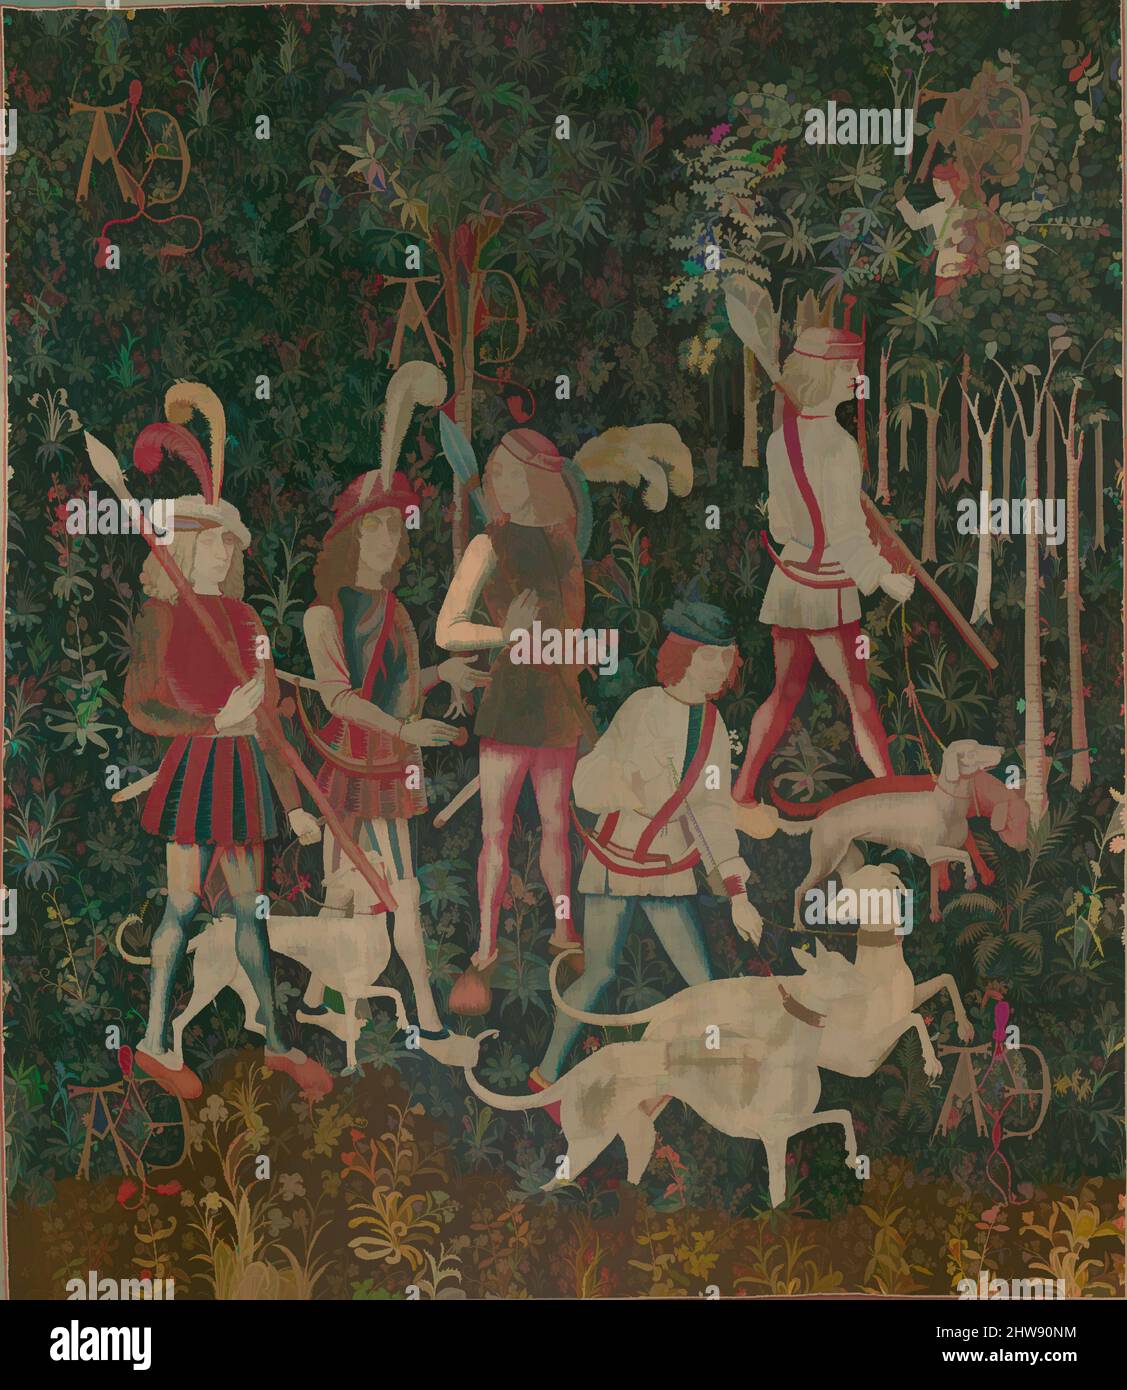 Art inspired by The Hunters Enter the Woods (from the Unicorn Tapestries), 1495–1505, South Netherlandish, Wool warp, wool, silk, silver, and gilt wefts, Overall: 145 x 124in. (368.3 x 315cm), Textiles-Tapestries, This tapestry is one of seven hangings at The Cloisters that depict the, Classic works modernized by Artotop with a splash of modernity. Shapes, color and value, eye-catching visual impact on art. Emotions through freedom of artworks in a contemporary way. A timeless message pursuing a wildly creative new direction. Artists turning to the digital medium and creating the Artotop NFT Stock Photo